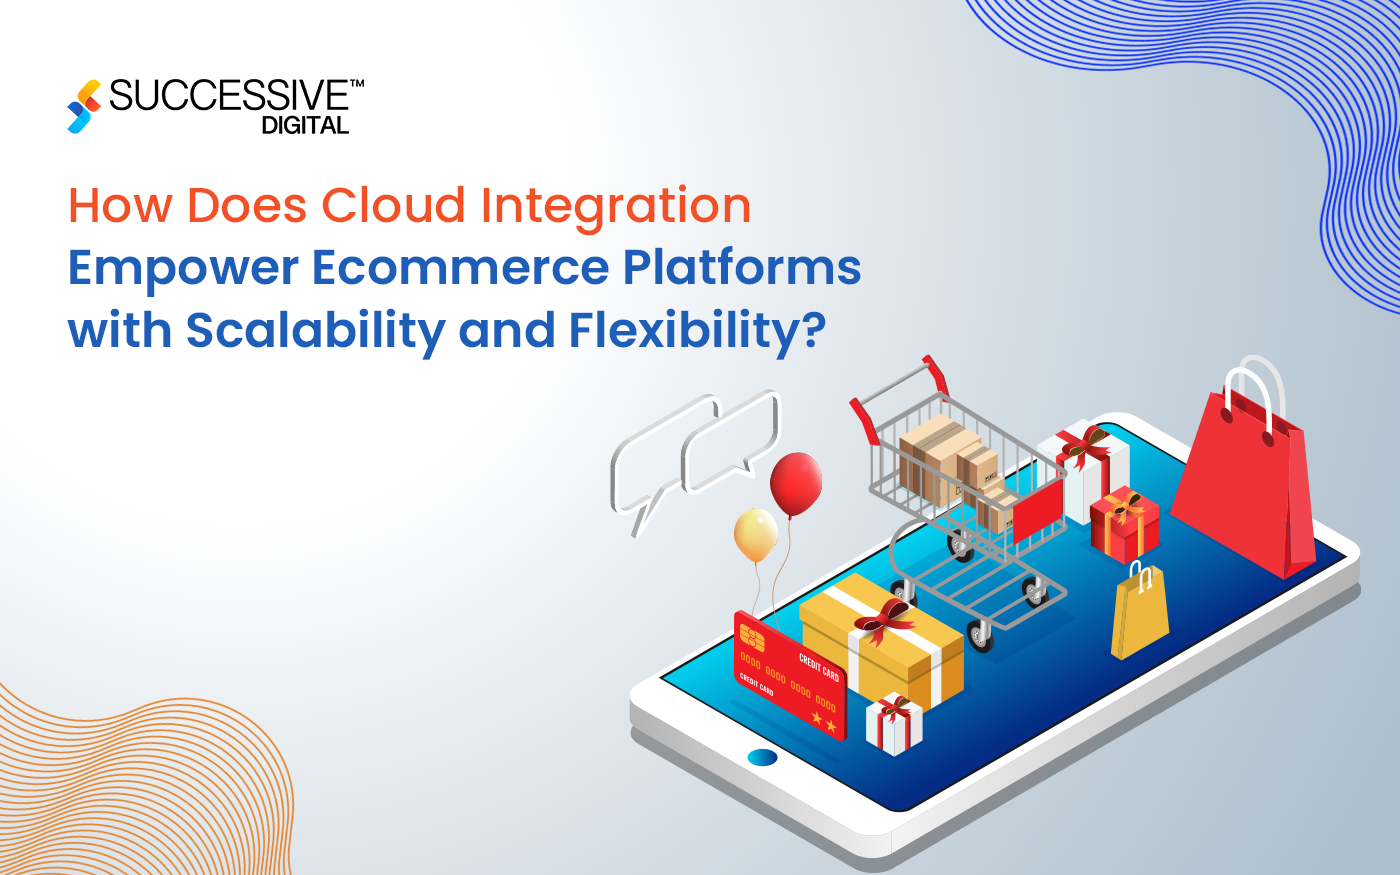 How Does Cloud Integration Empower eCommerce Platforms with Scalability and Flexibility?